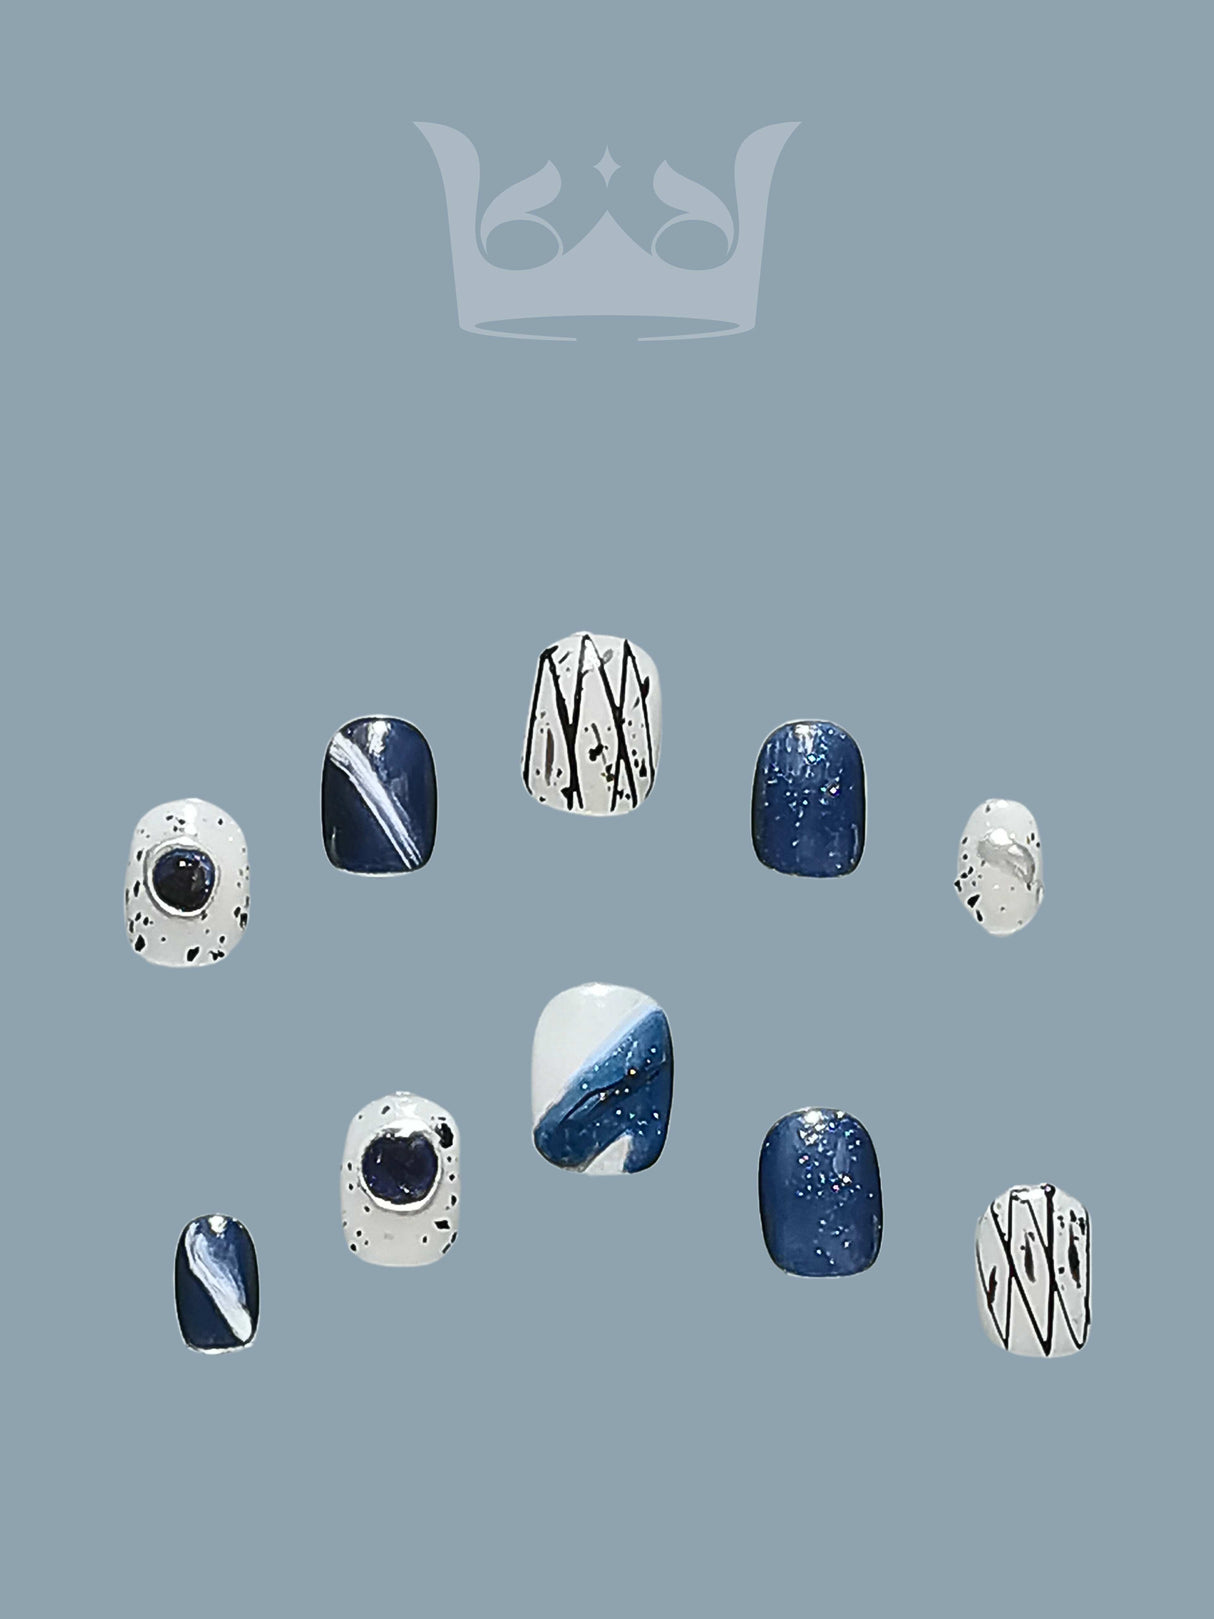 These press-on nails are designed for press-on or nail art inspiration, featuring creative blue and white patterns with dots, stripes, abstract lines, and glossy finishes.